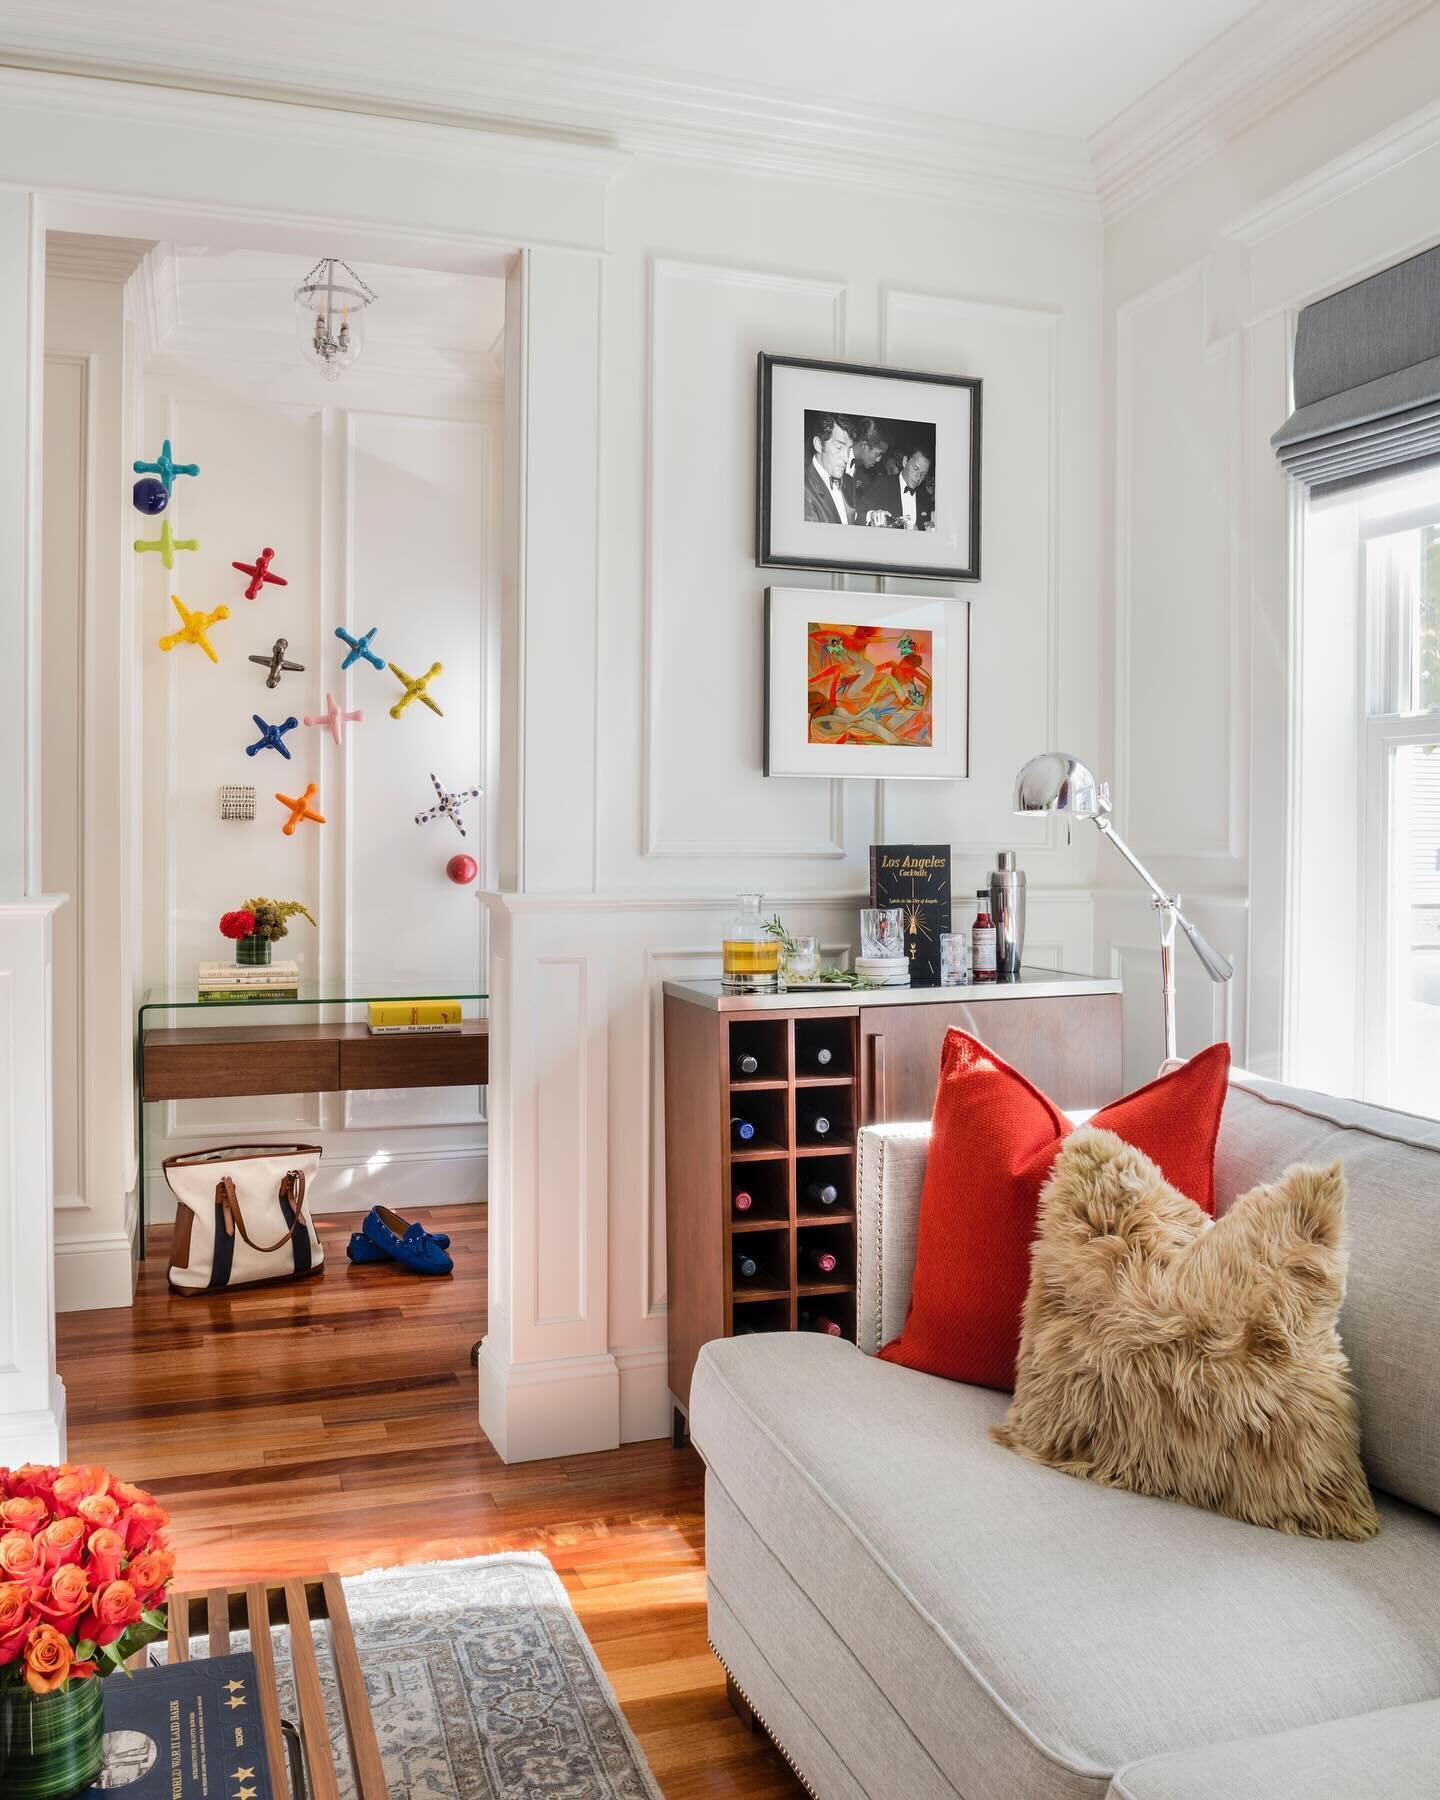 Home revamp in South Boston

Photography: @sabrinacolequinn